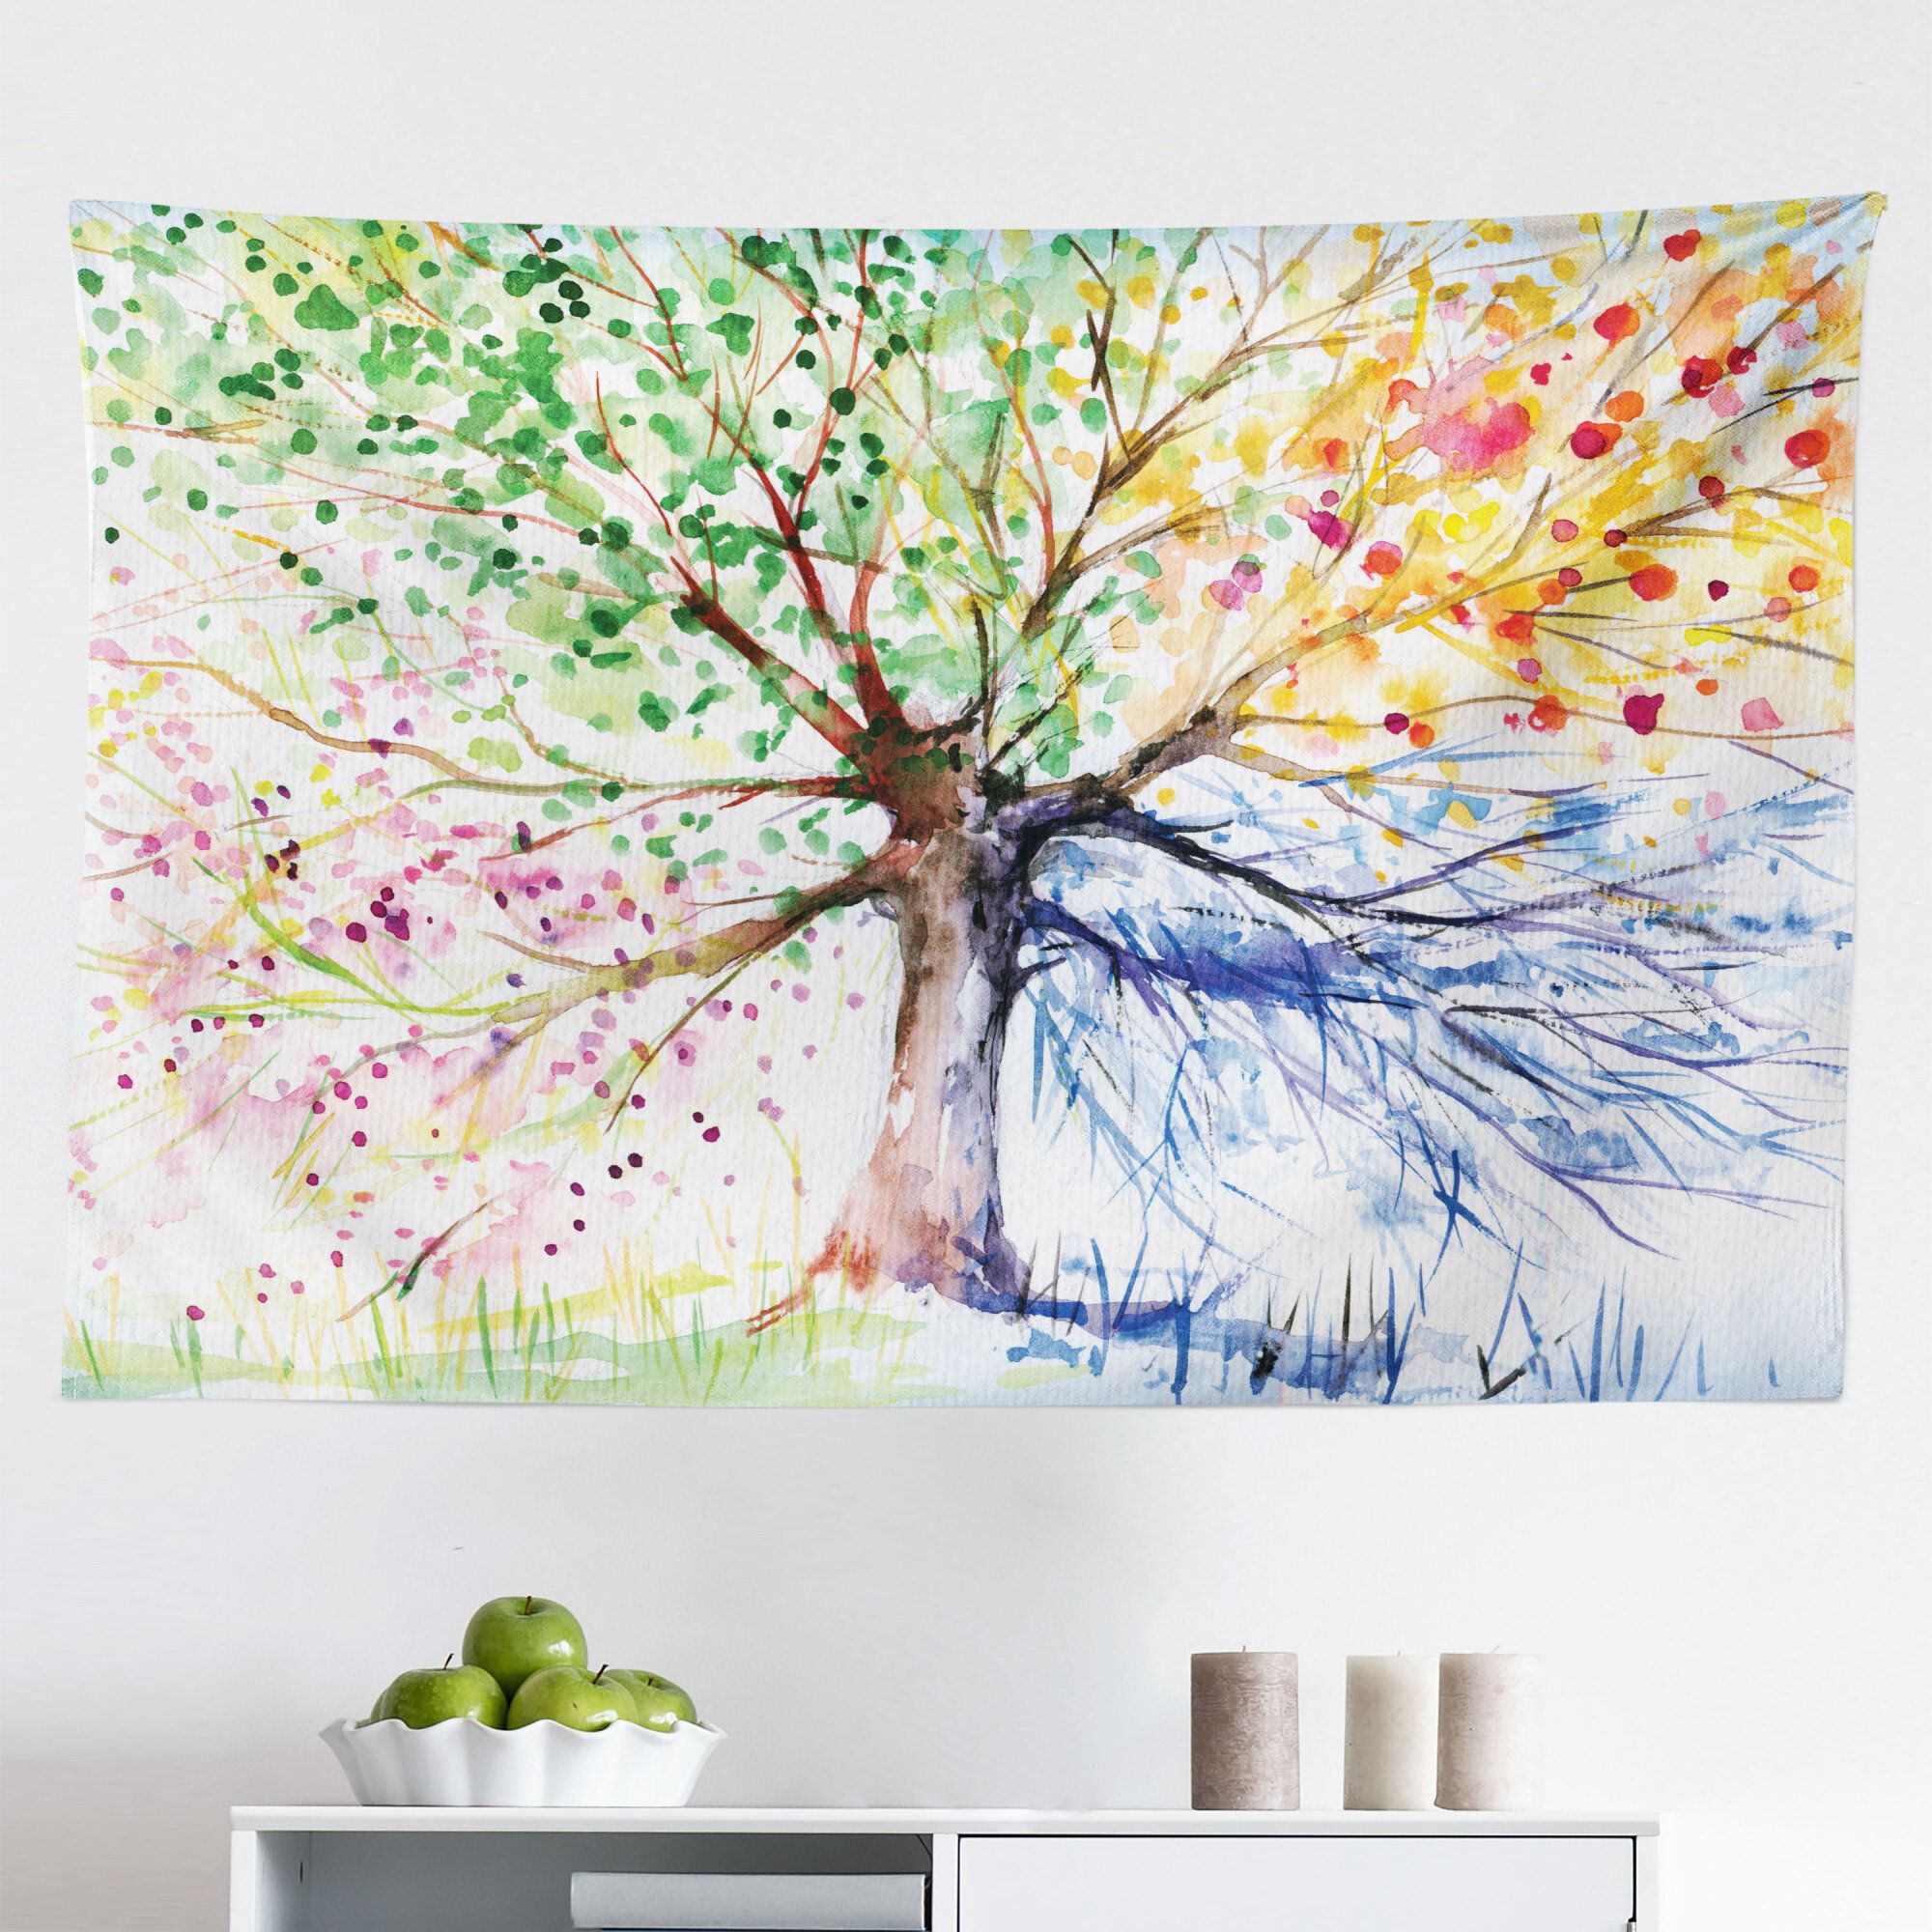 East Urban Home Tree Tapestry, Watercolor Nature Colorful Blooming Branches  4 Seasons Themed Illustration Print, Fabric Wall Hanging Decor For Bedroom  Living Room Dorm, 45" X 30", Multicolor | Wayfair Pertaining To Most Up To Date Colorful Branching Wall Art (View 12 of 20)